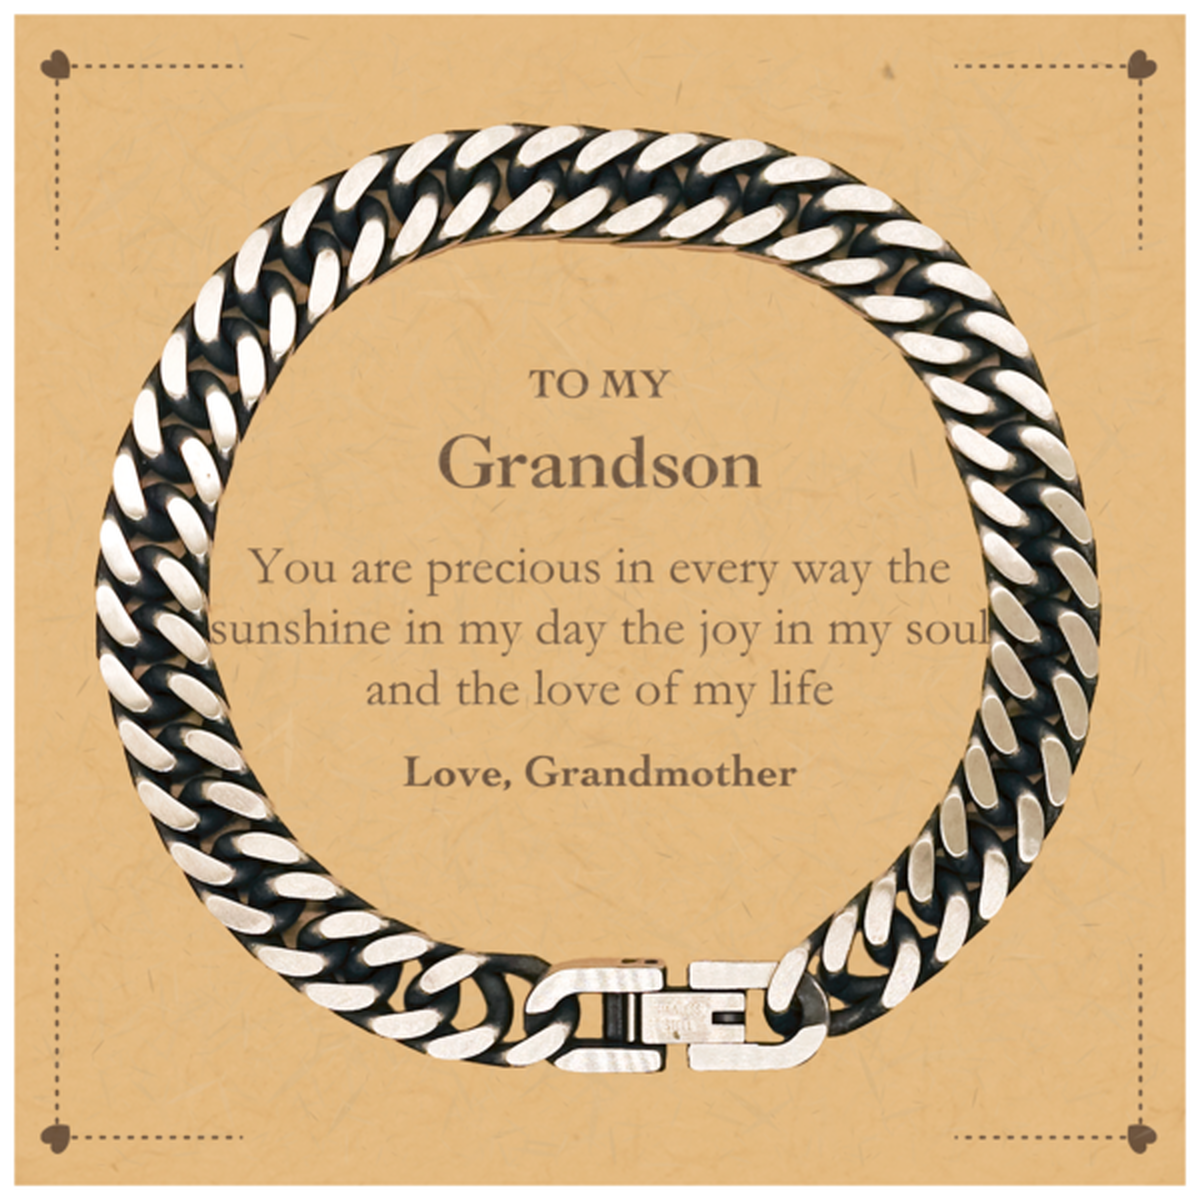 Graduation Gifts for Grandson Cuban Link Chain Bracelet Present from Grandmother, Christmas Grandson Birthday Gifts Grandson You are precious in every way the sunshine in my day. Love, Grandmother